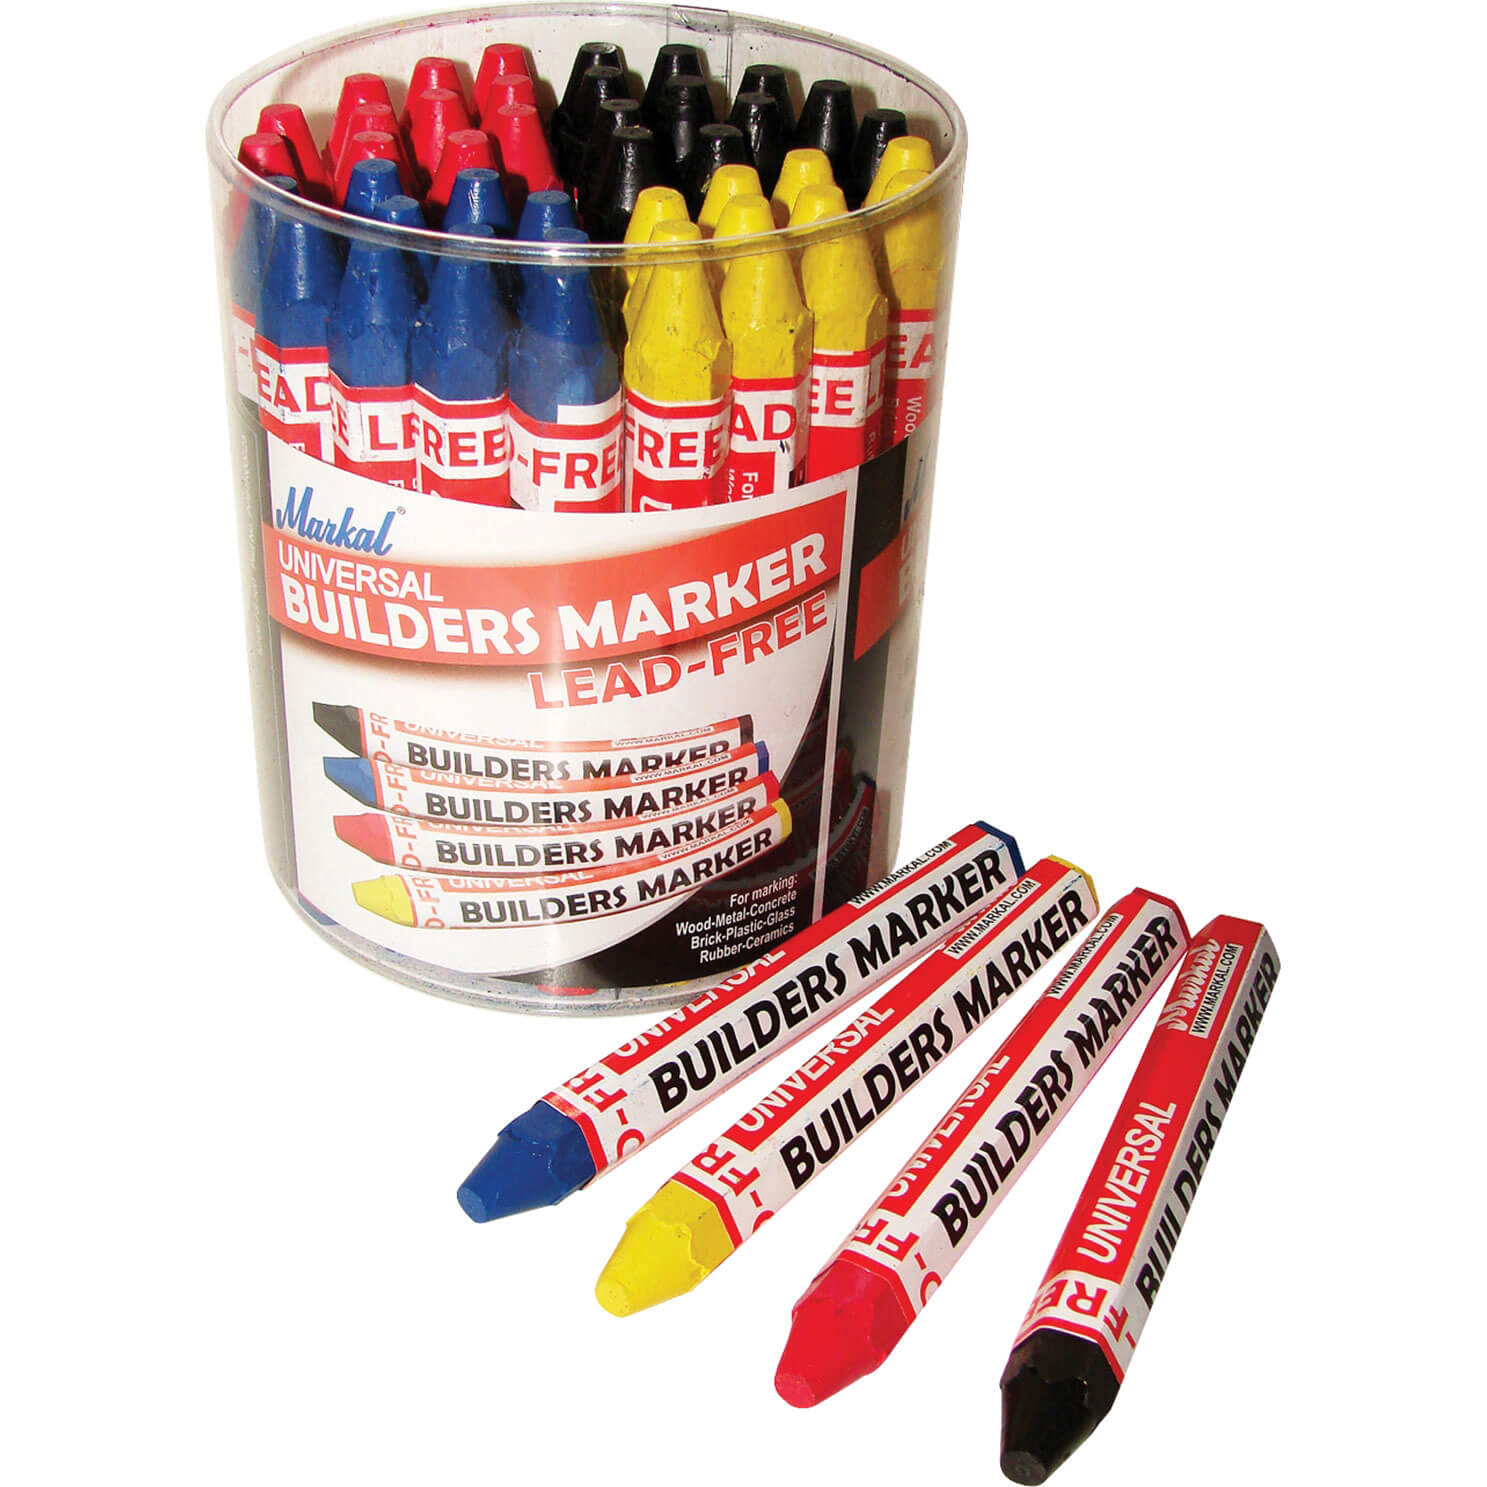 Image of Markal Universal Builders Marker Crayon Assorted Pack of 48